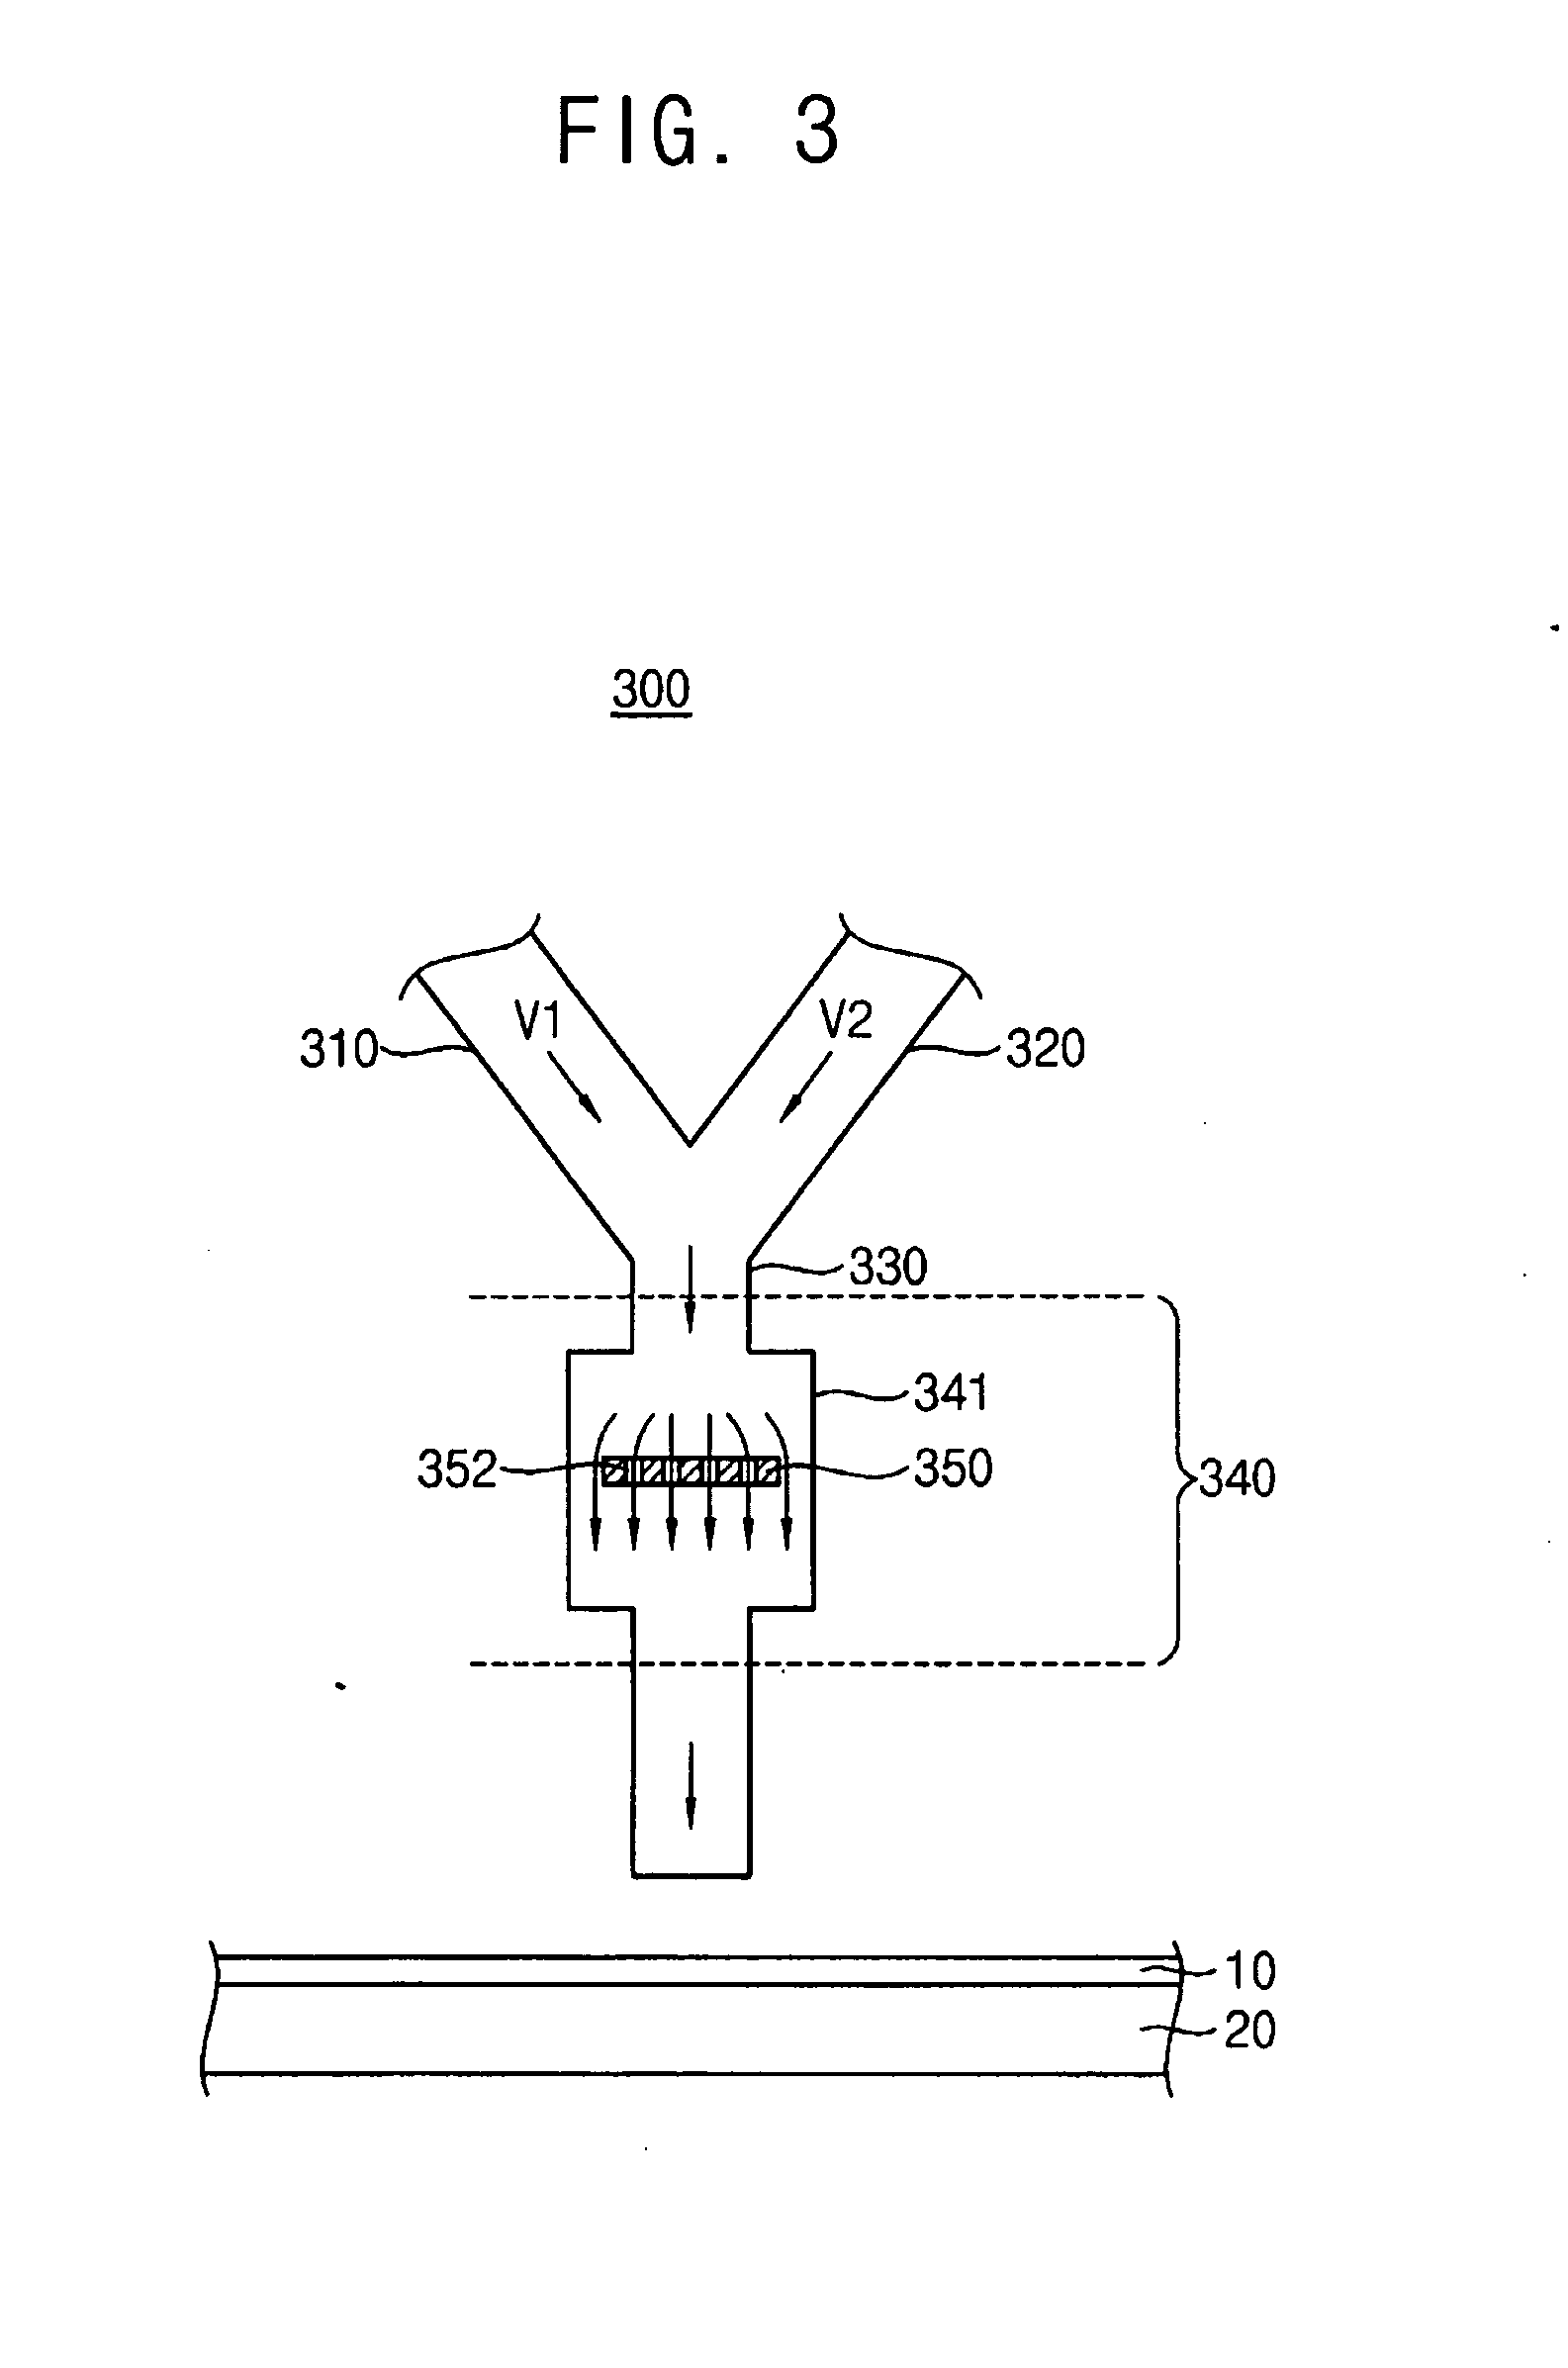 Slurry delivery system, chemical mechanical polishing apparatus and method for using the same